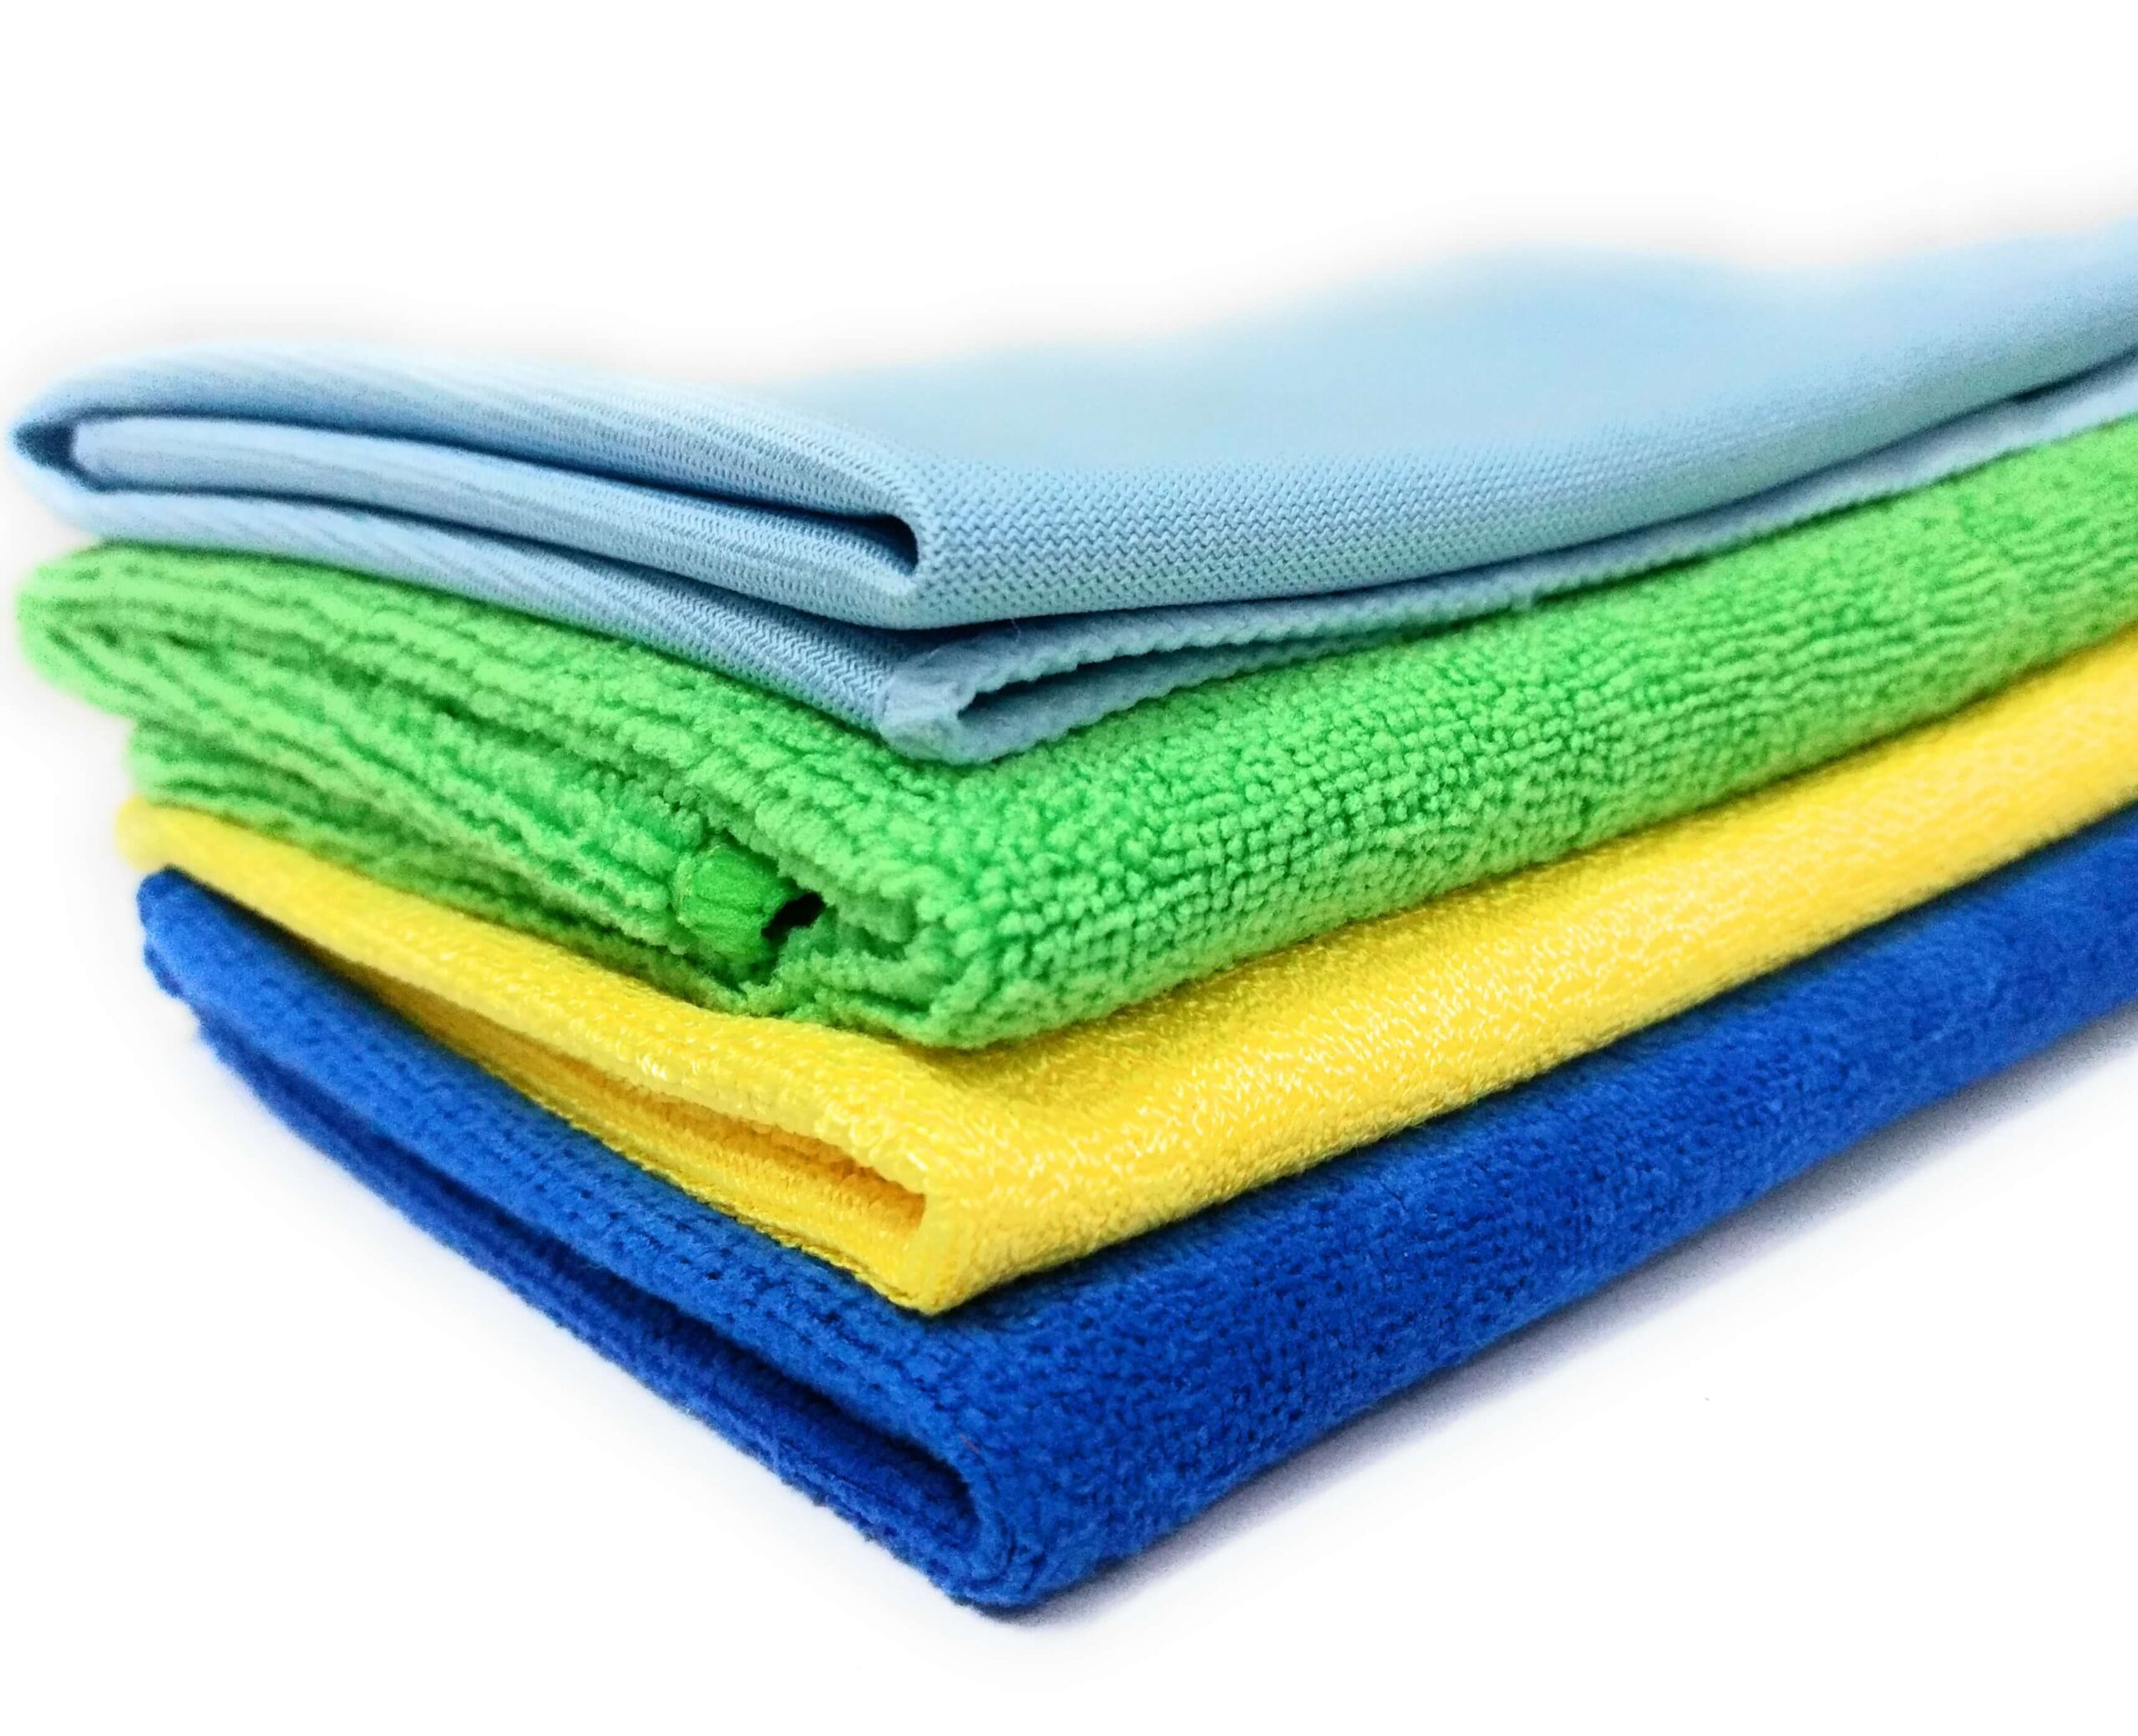 How to choose the best microfiber cloth - Microfiber clothes